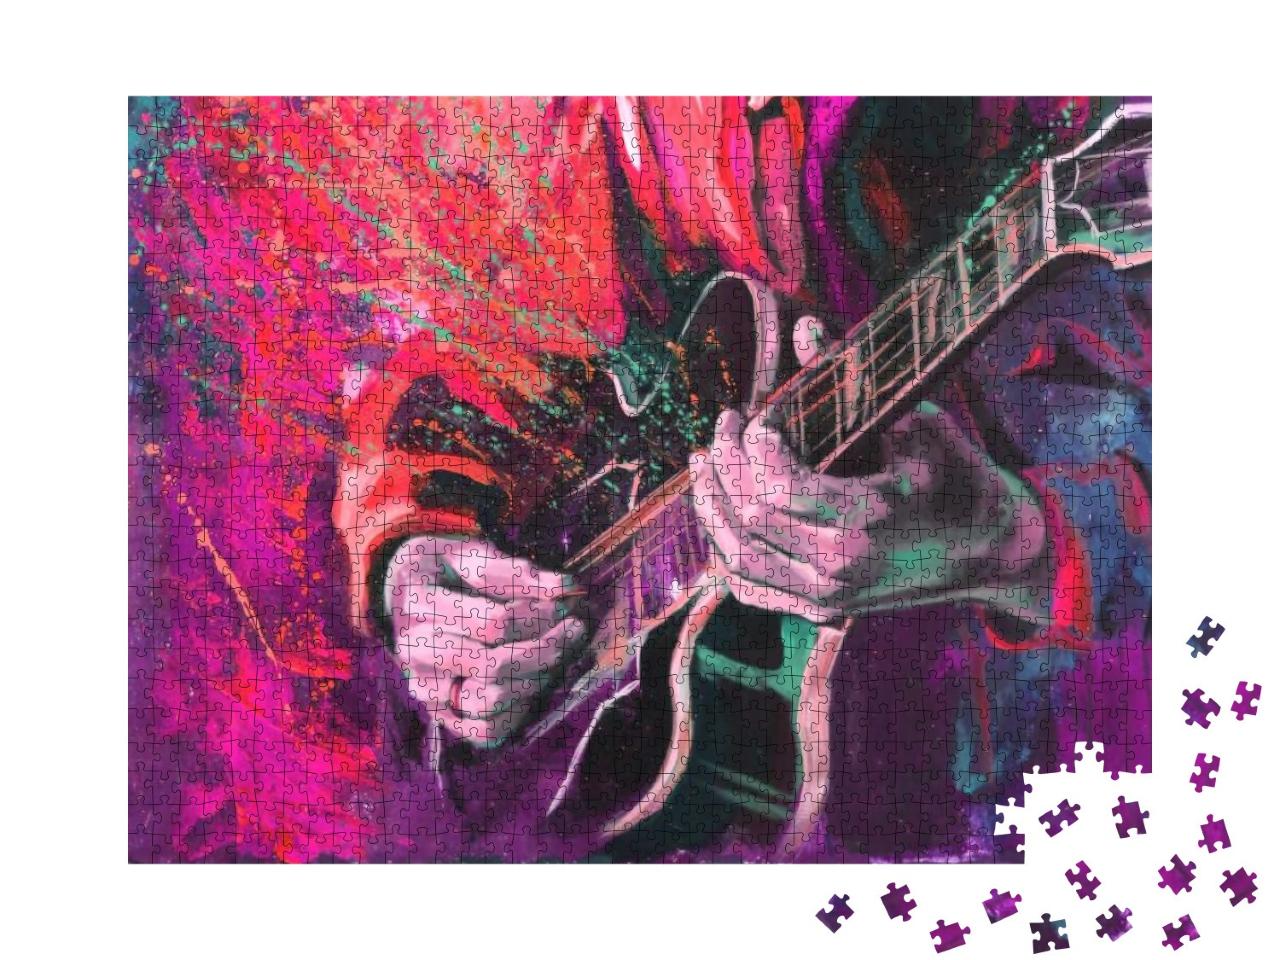 Jazz Guitarists Hands, Playing Guitar, with Multicolored... Jigsaw Puzzle with 1000 pieces